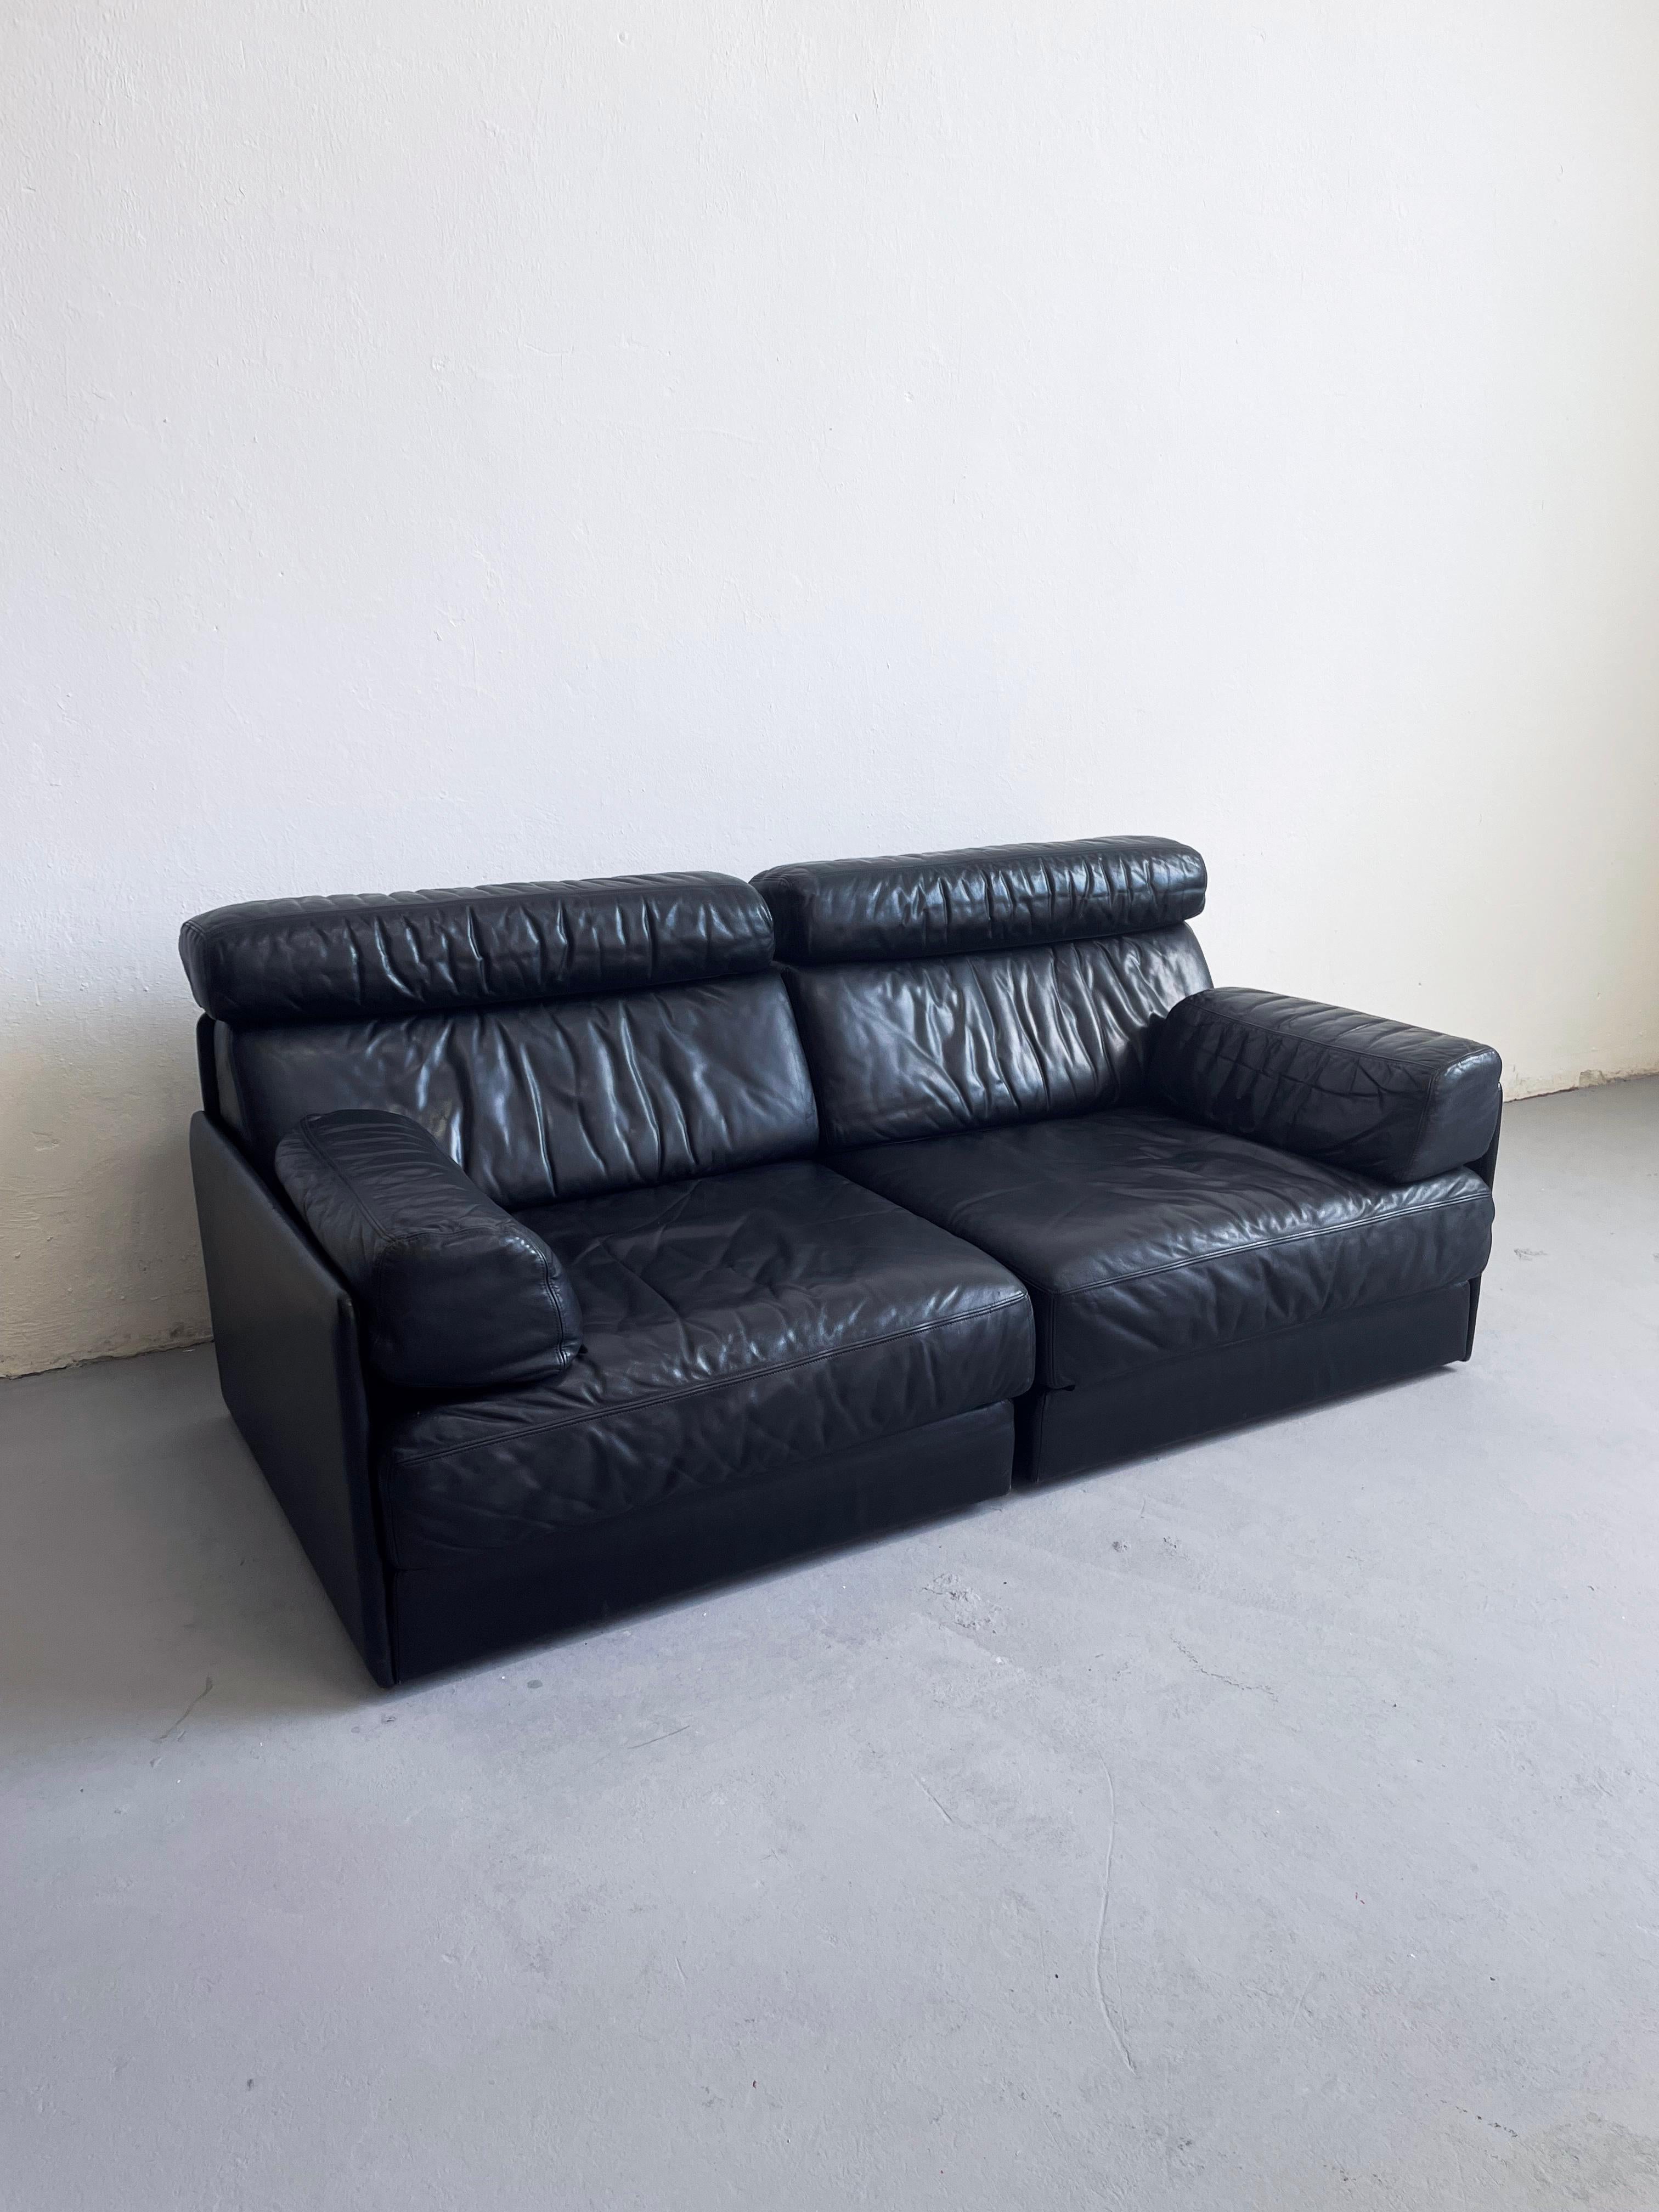 Vintage De Sede two-seater sofa/ sofa bed, model 'DS-77', leather, fabric, Switzerland, the 1970s.

Important: The item offered for sale is in very good original condition. The leather is not worn, nor damaged. It has just small traces of cosmetic